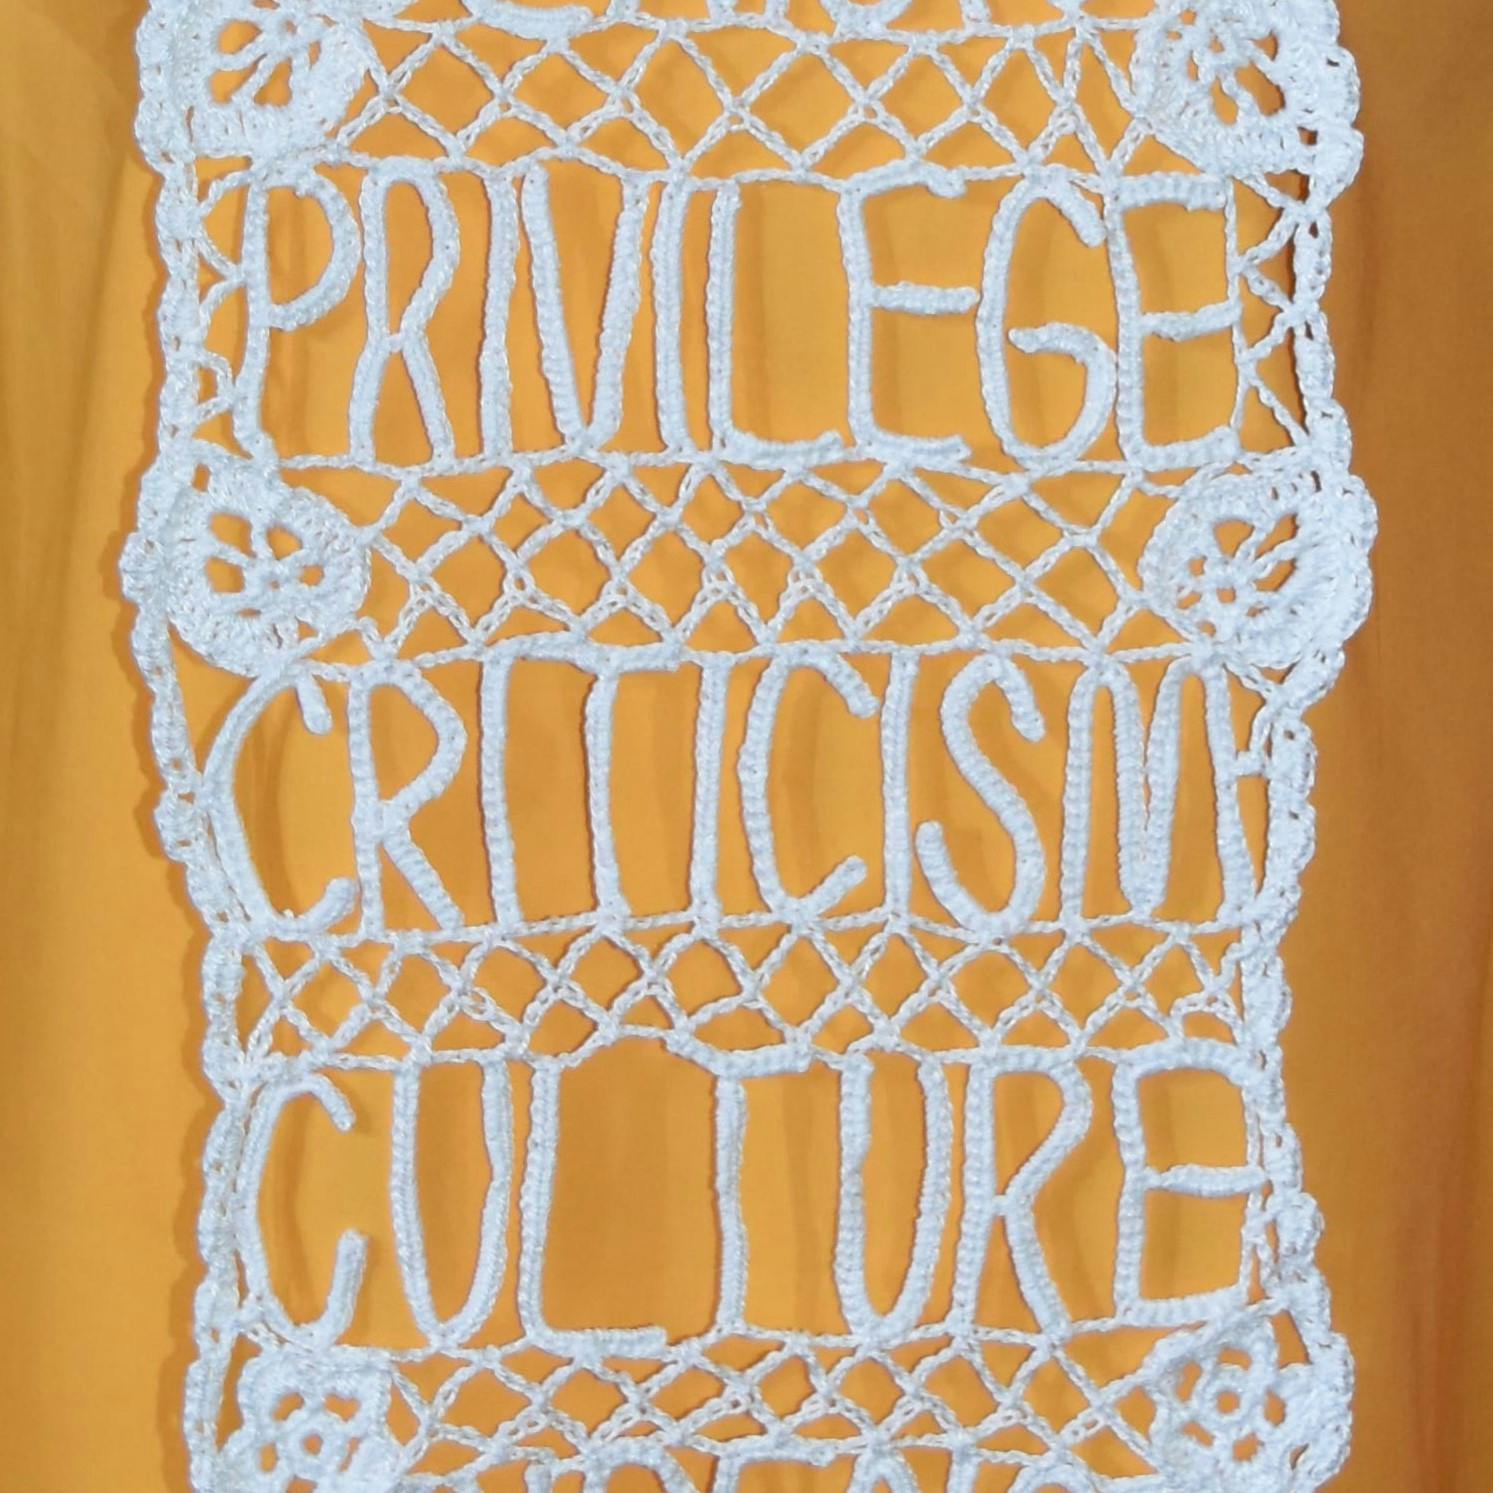 Close up of crochet lace with wording 'Privilege, Criticism, Culture' on